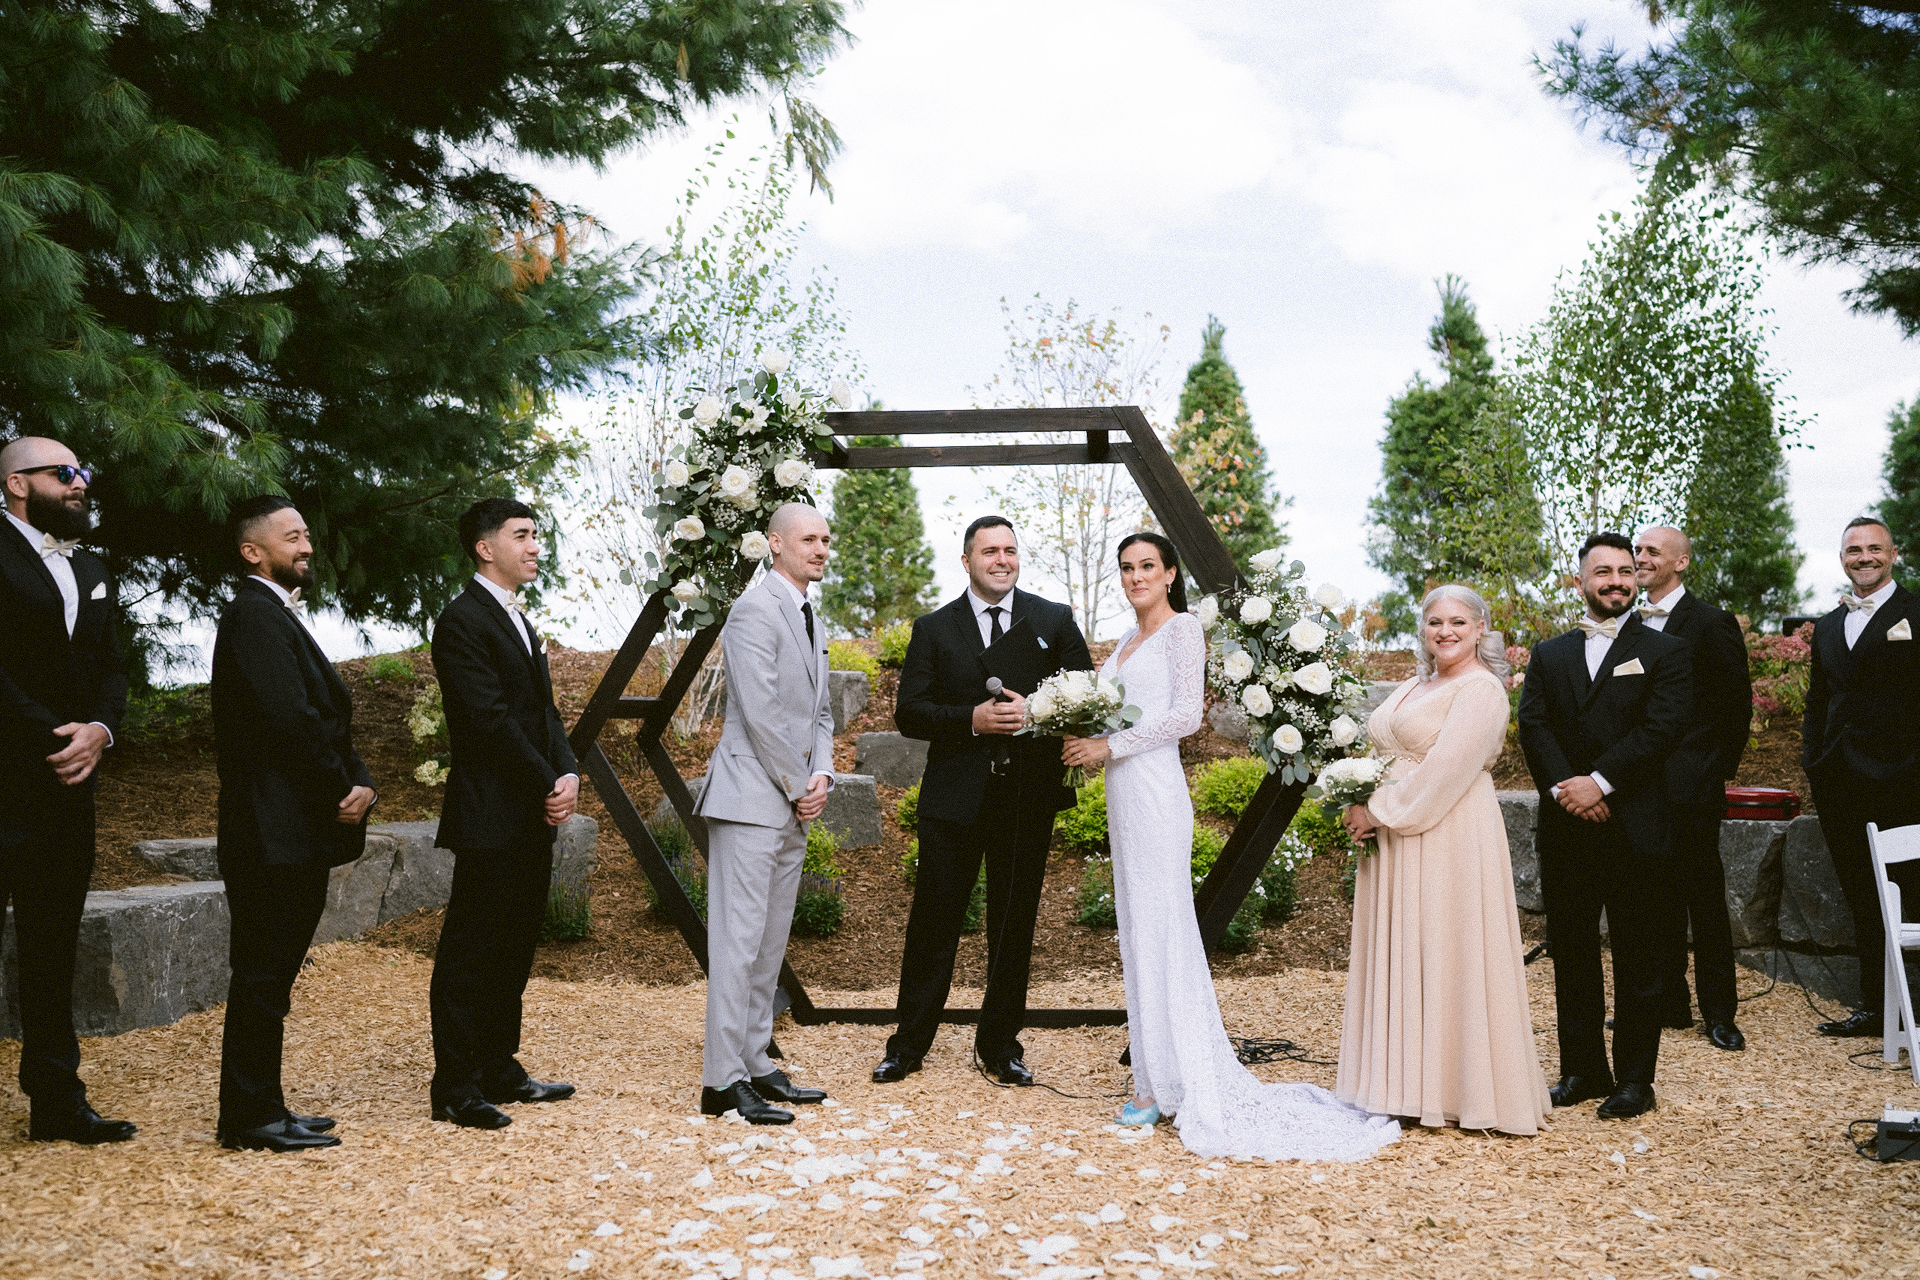 A wedding ceremony in progress with a bride and groom standing at the altar, surrounded by groomsmen and a bridesmaid